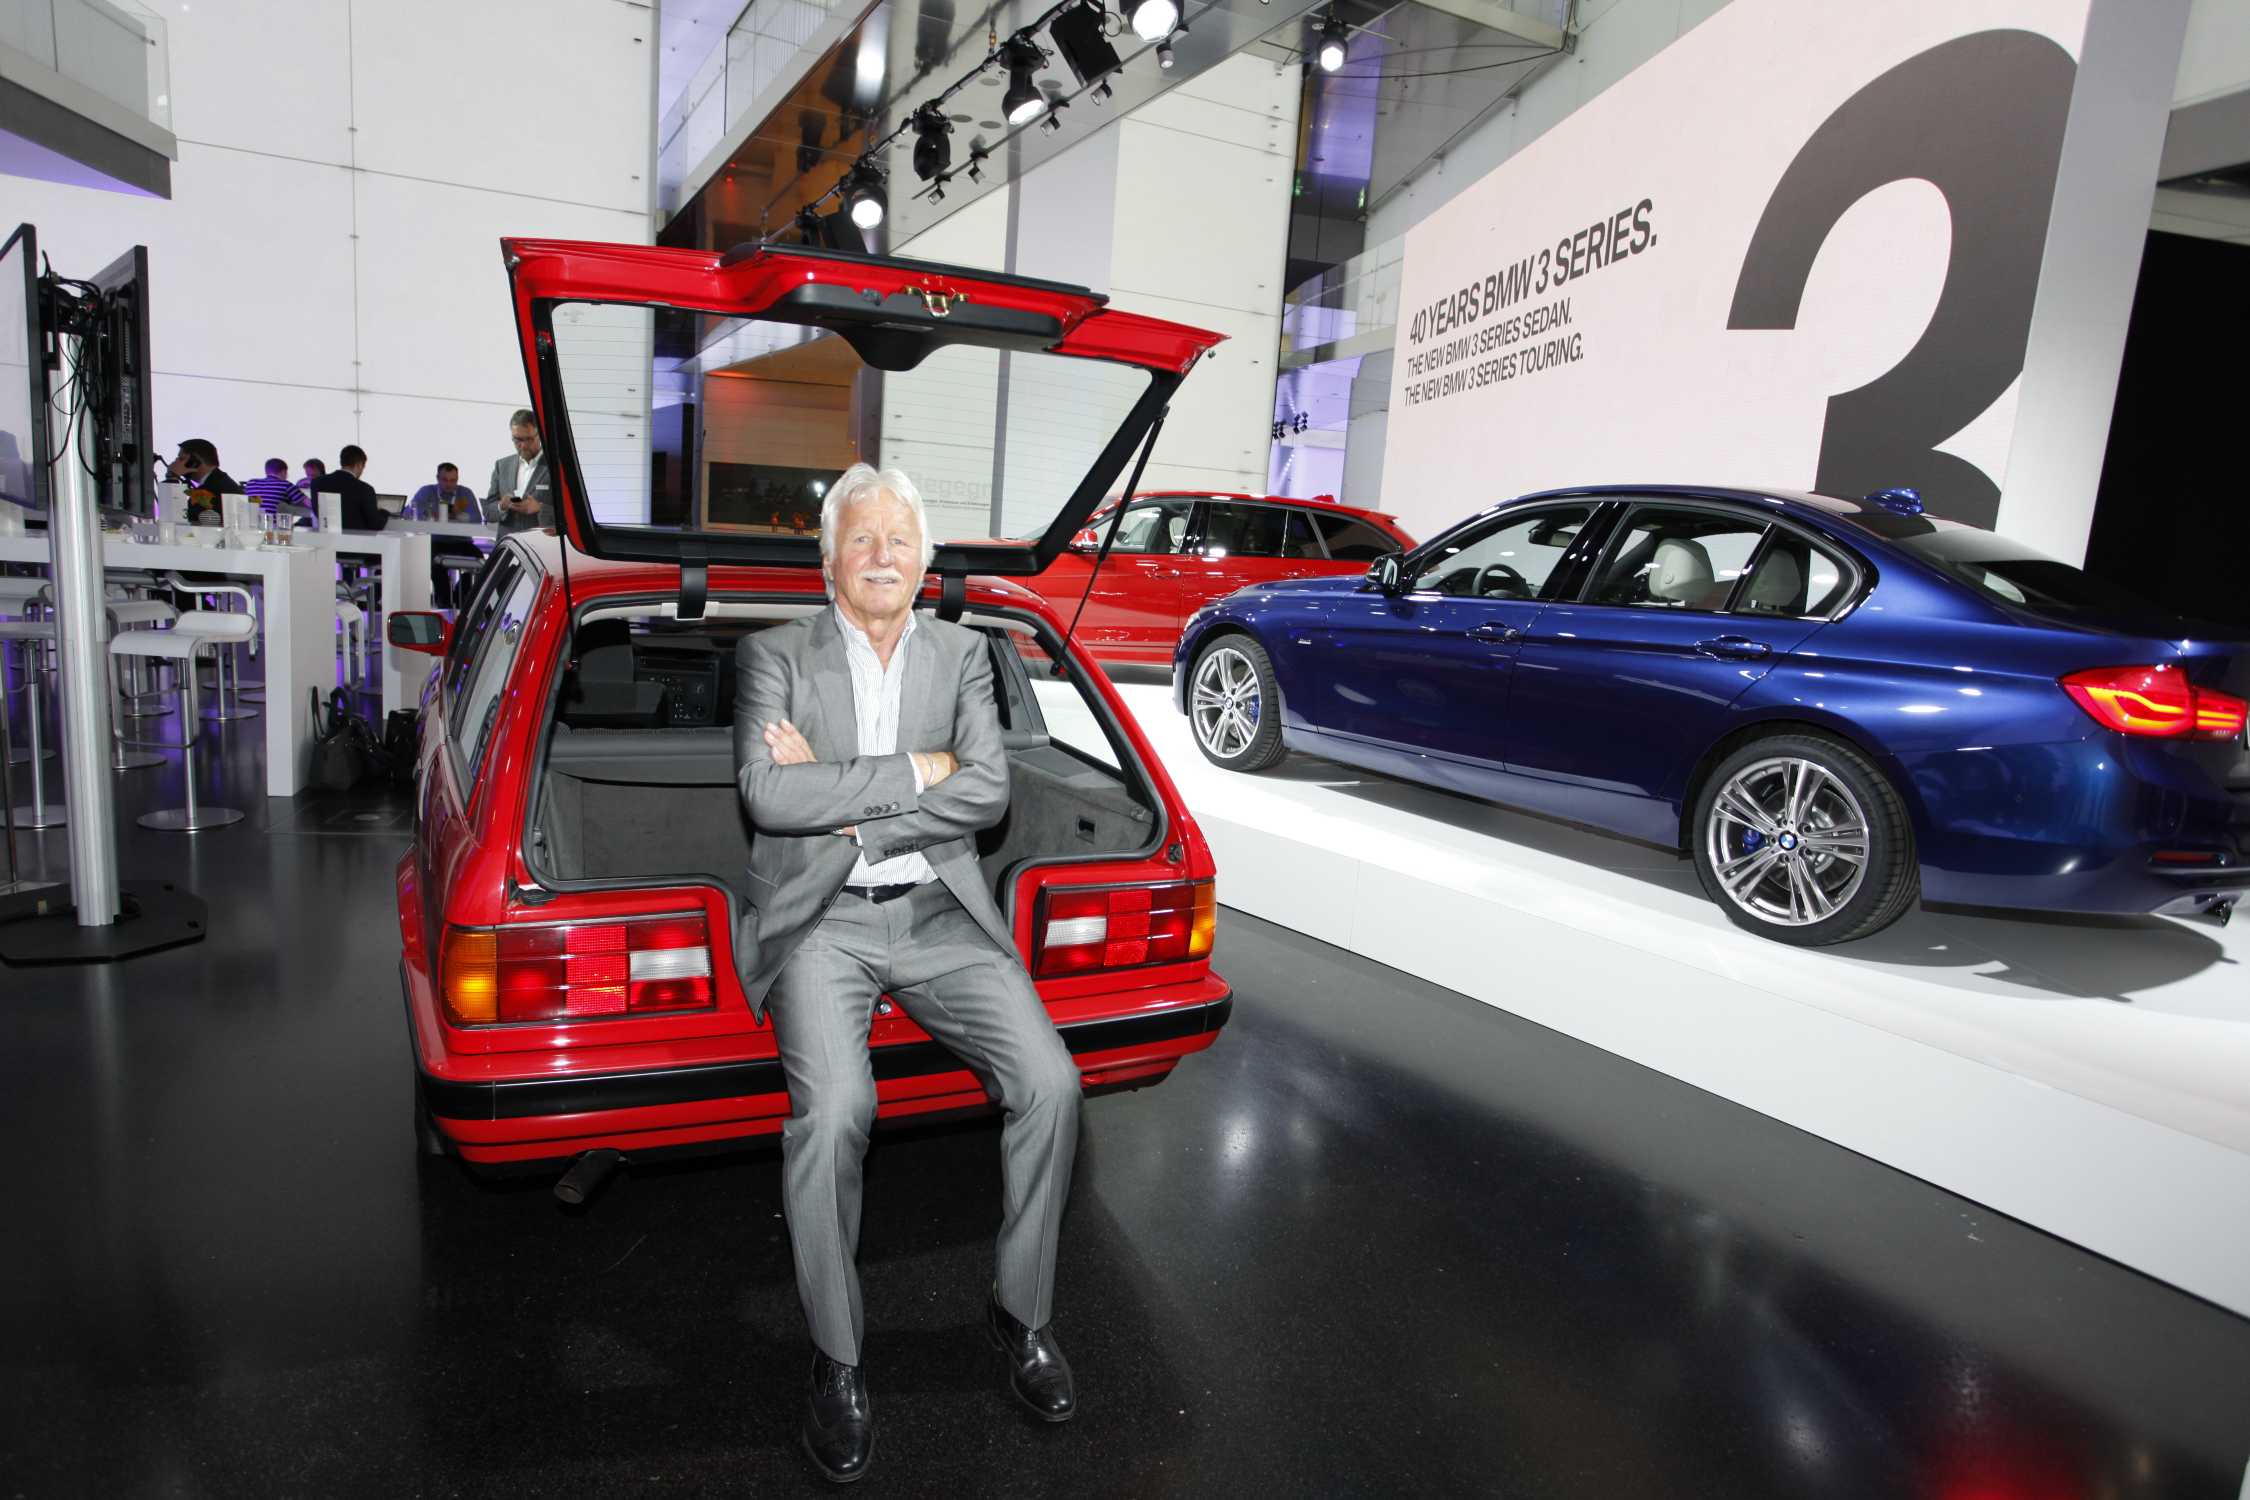 325 IX Touringe - Page 11 P90184896-3-series-estate-of-the-art-max-reisboeck-and-his-creation-the-bmw-3-series-touring-2250px